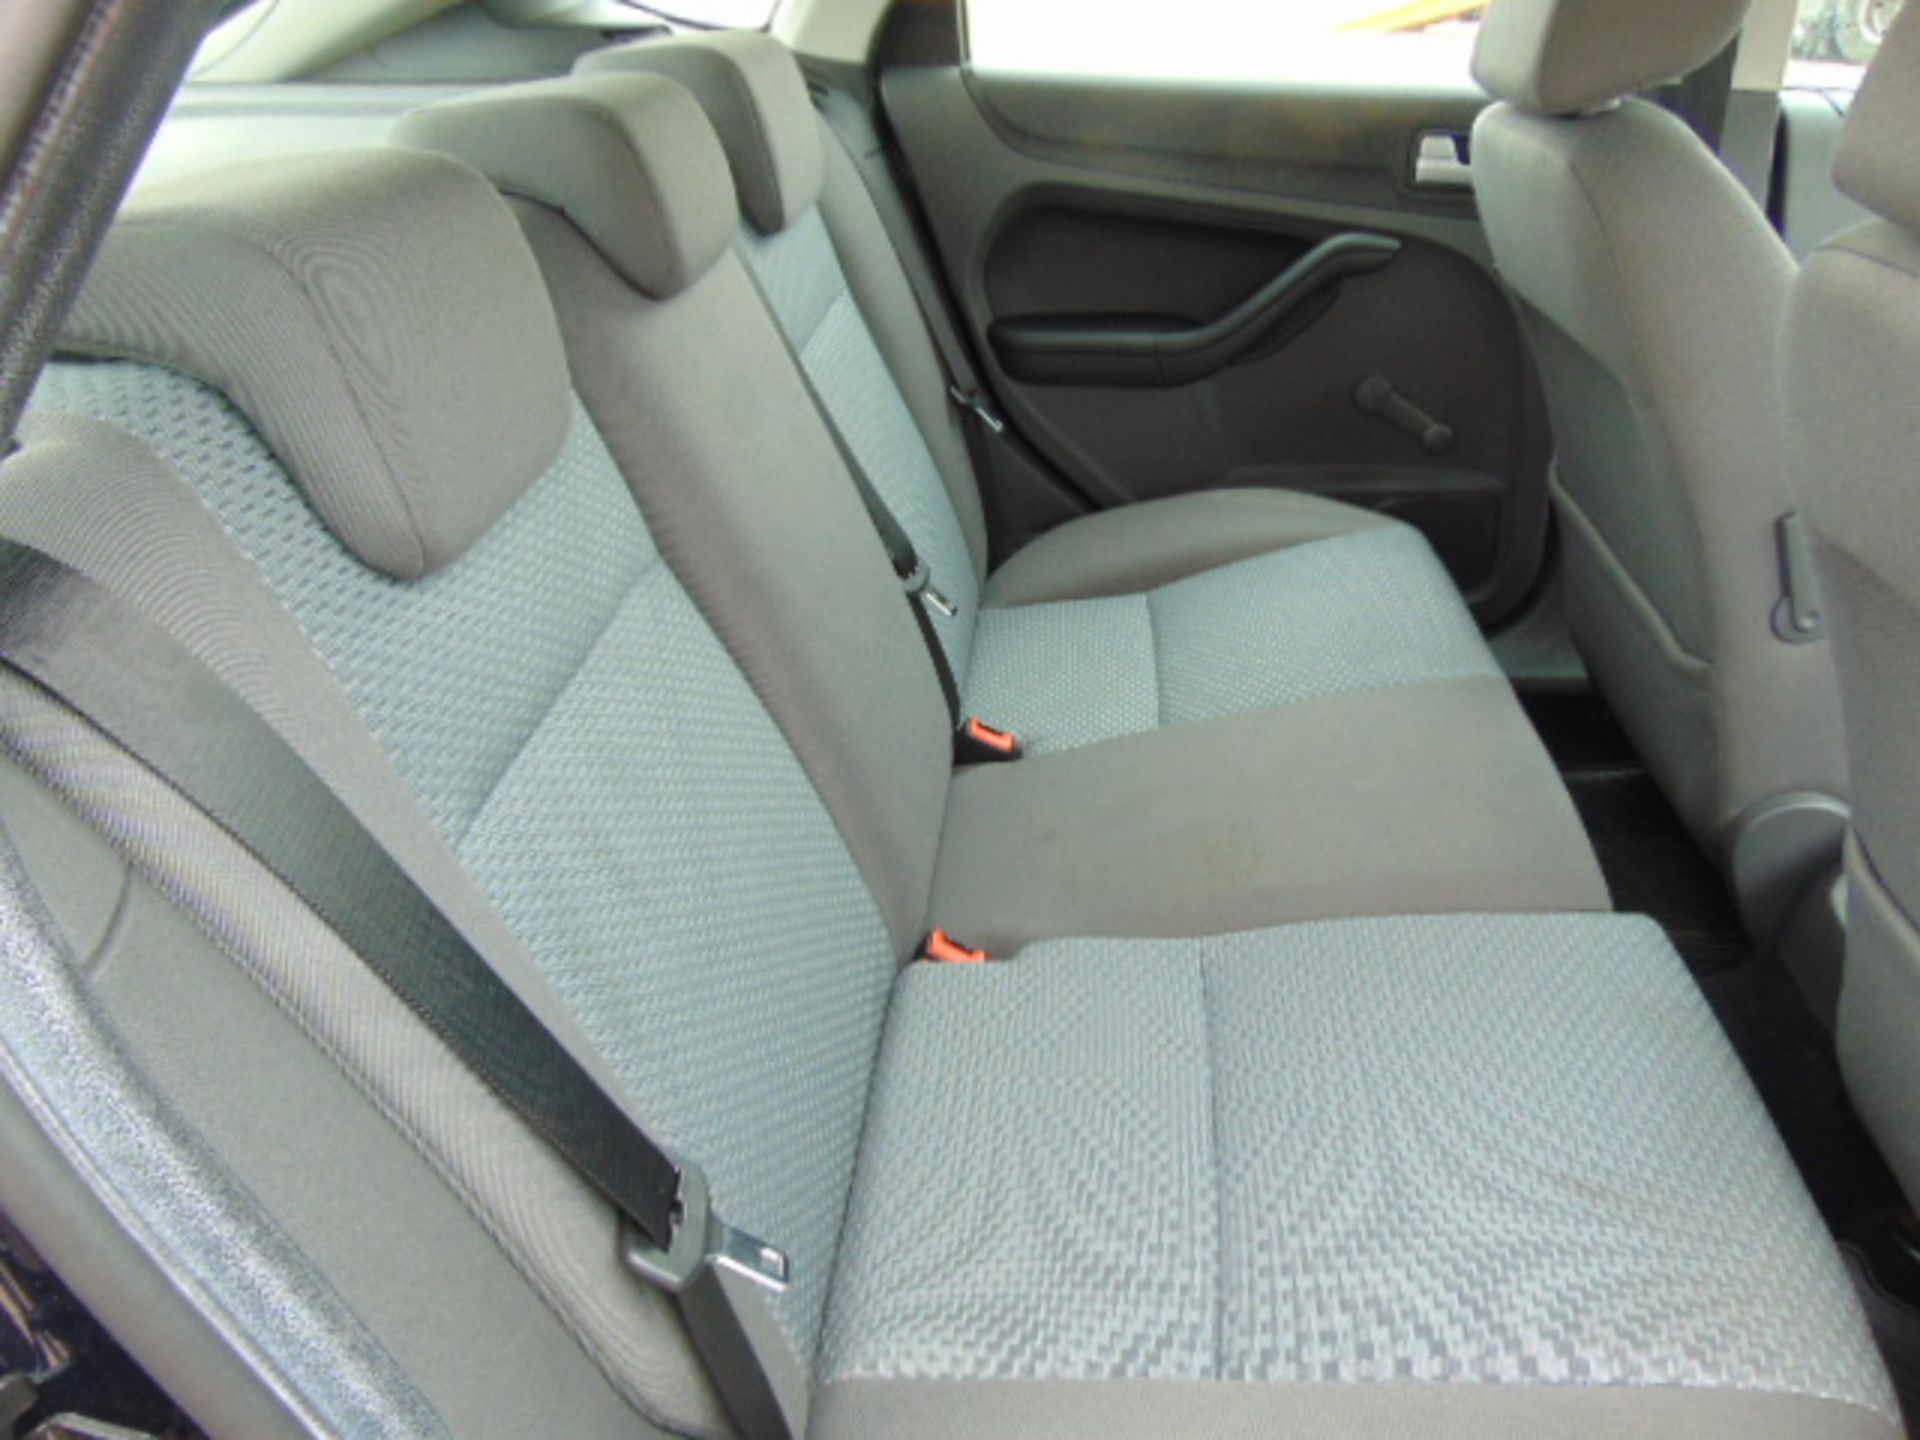 2008 Ford Focus 1.8 TDCI Style Hatchback - Image 15 of 18